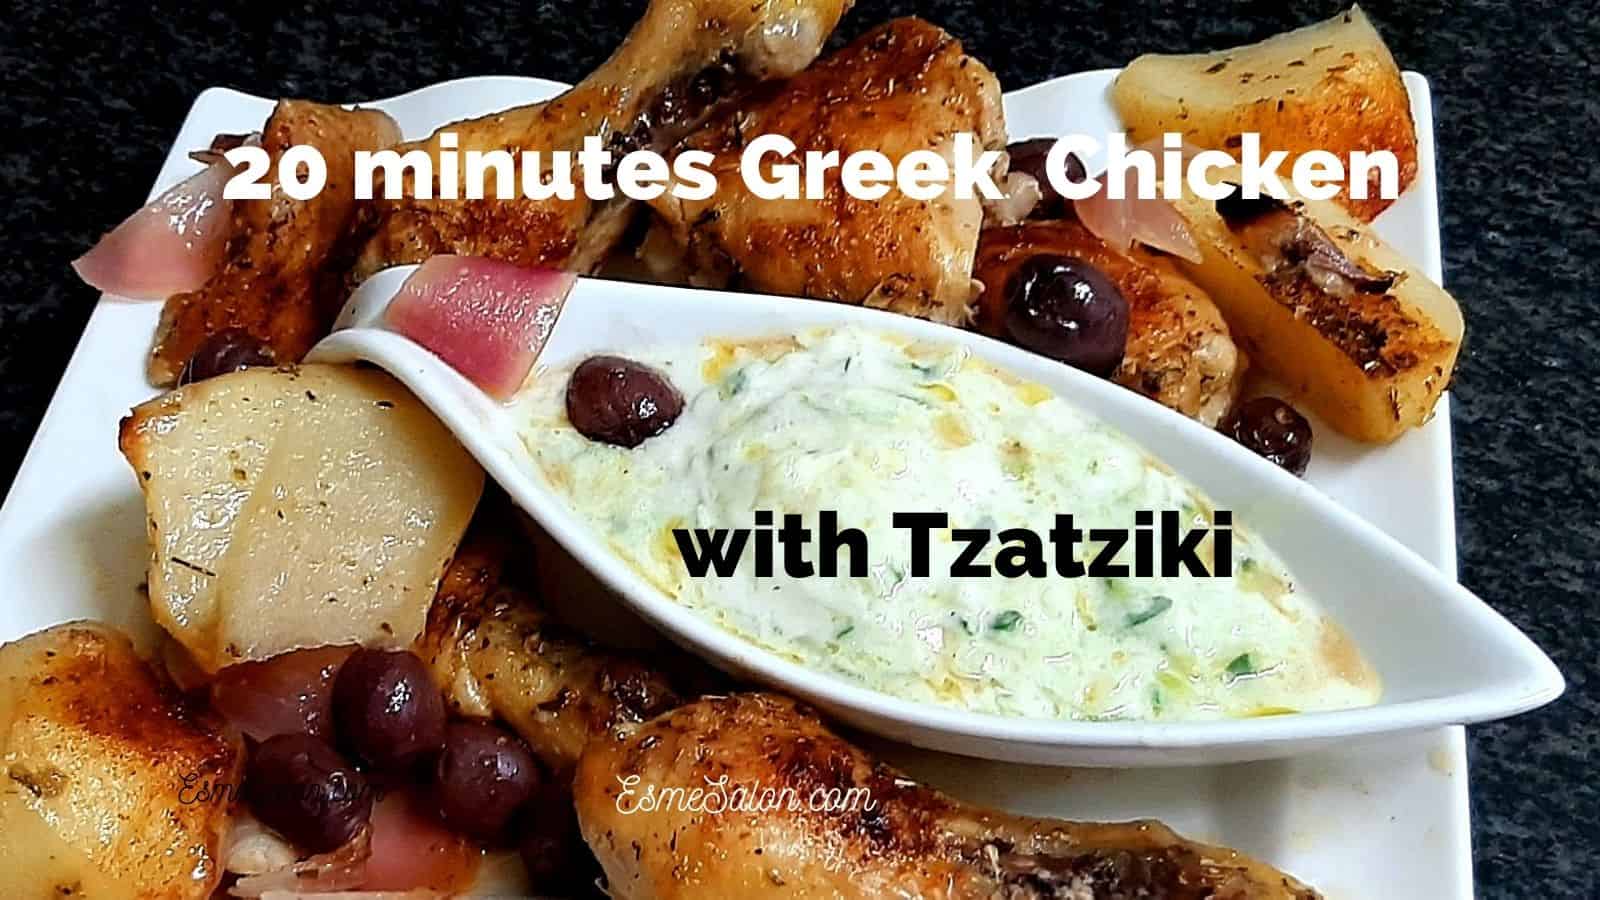 White platter with chicken pieces, olives, potato and Tzatziki